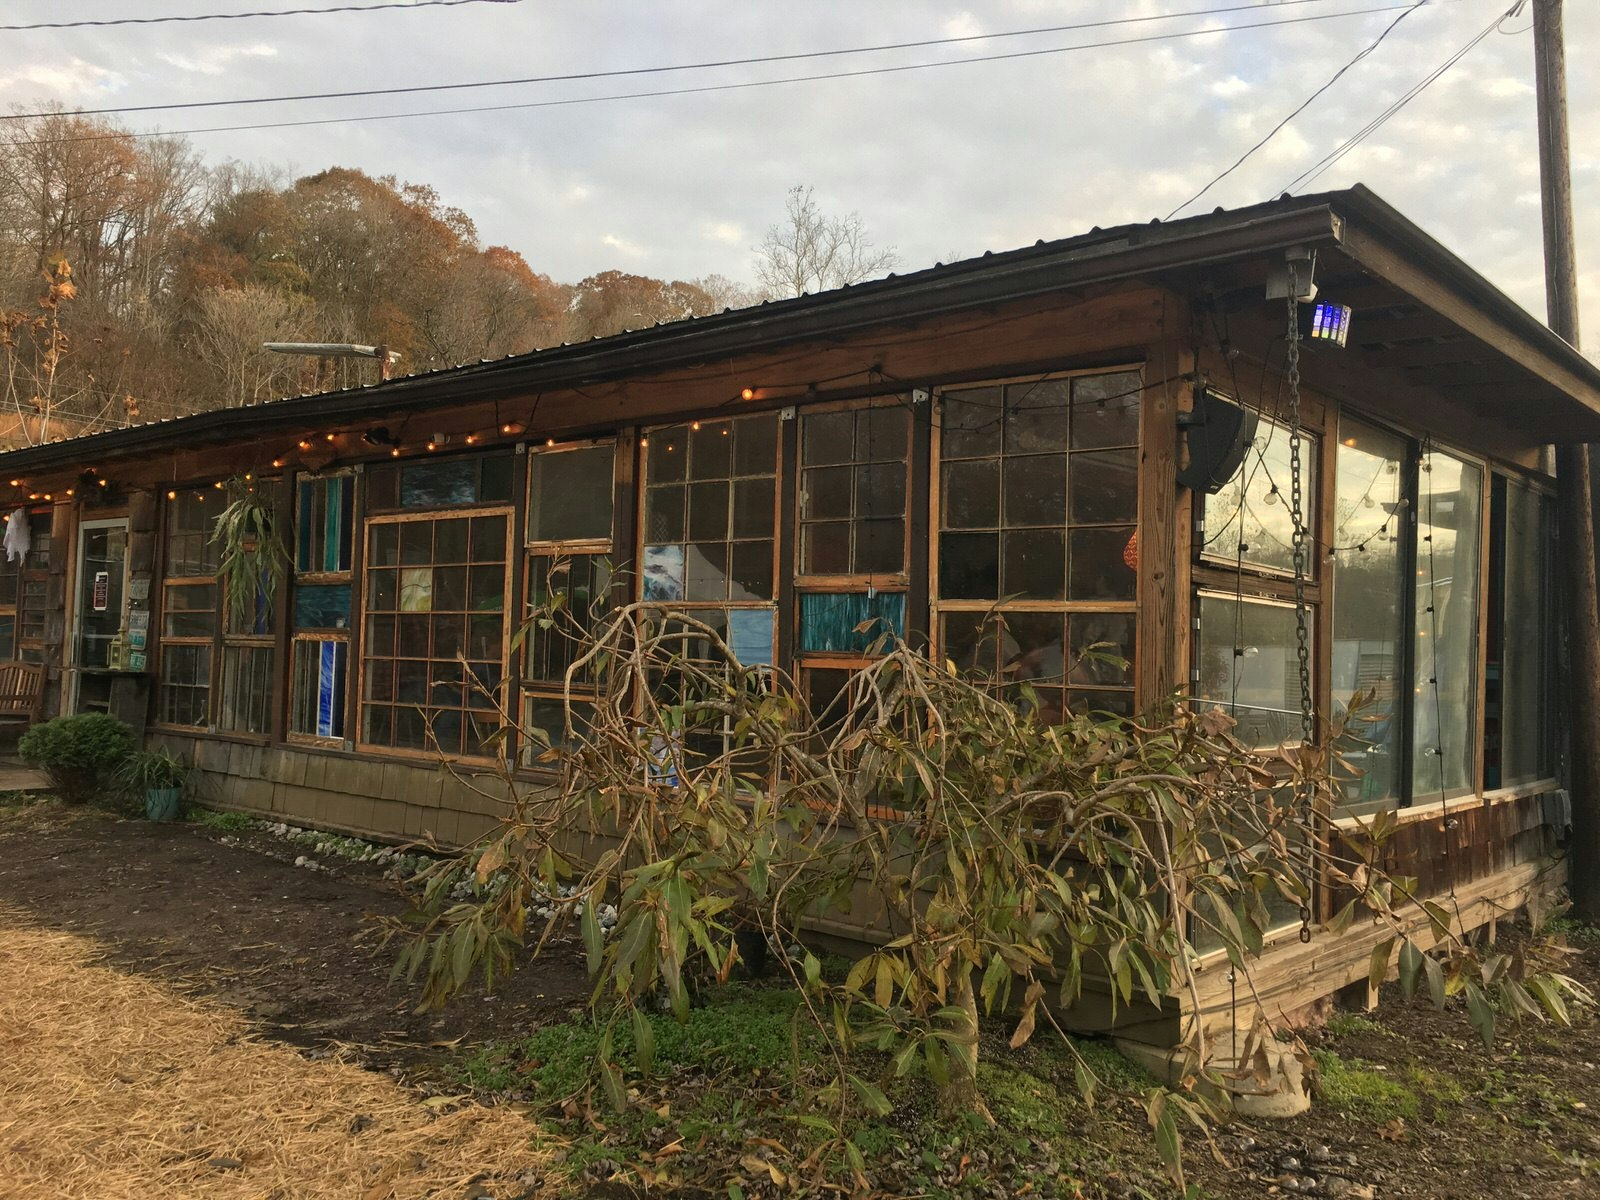 A dingy-looking one-story building with grimy window panels, with untended shrubbery in front of it and a string of lightbulbs strung above its window frames; this is The Bywater, a local favorite music venue in Asheville, North Carolina.